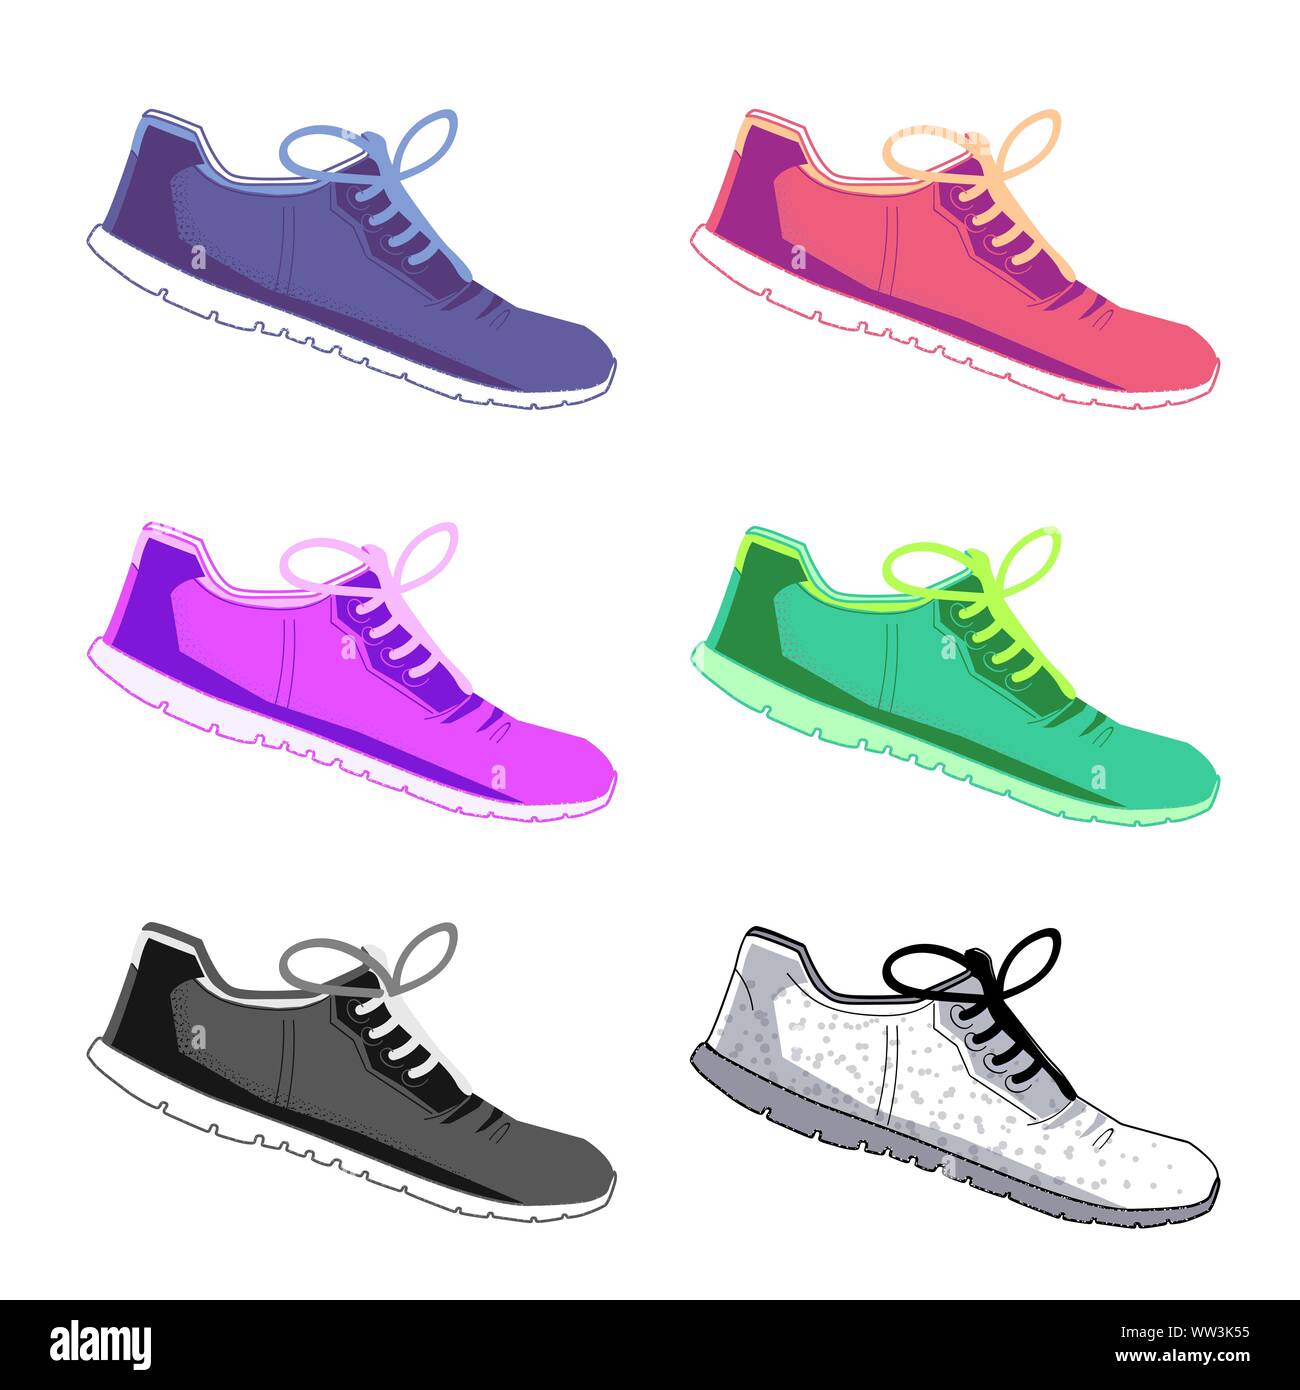 Sports shoes vector set. Fashion sportwear, everyday sneaker, footwear clothing illustration on isolated background Stock Vector